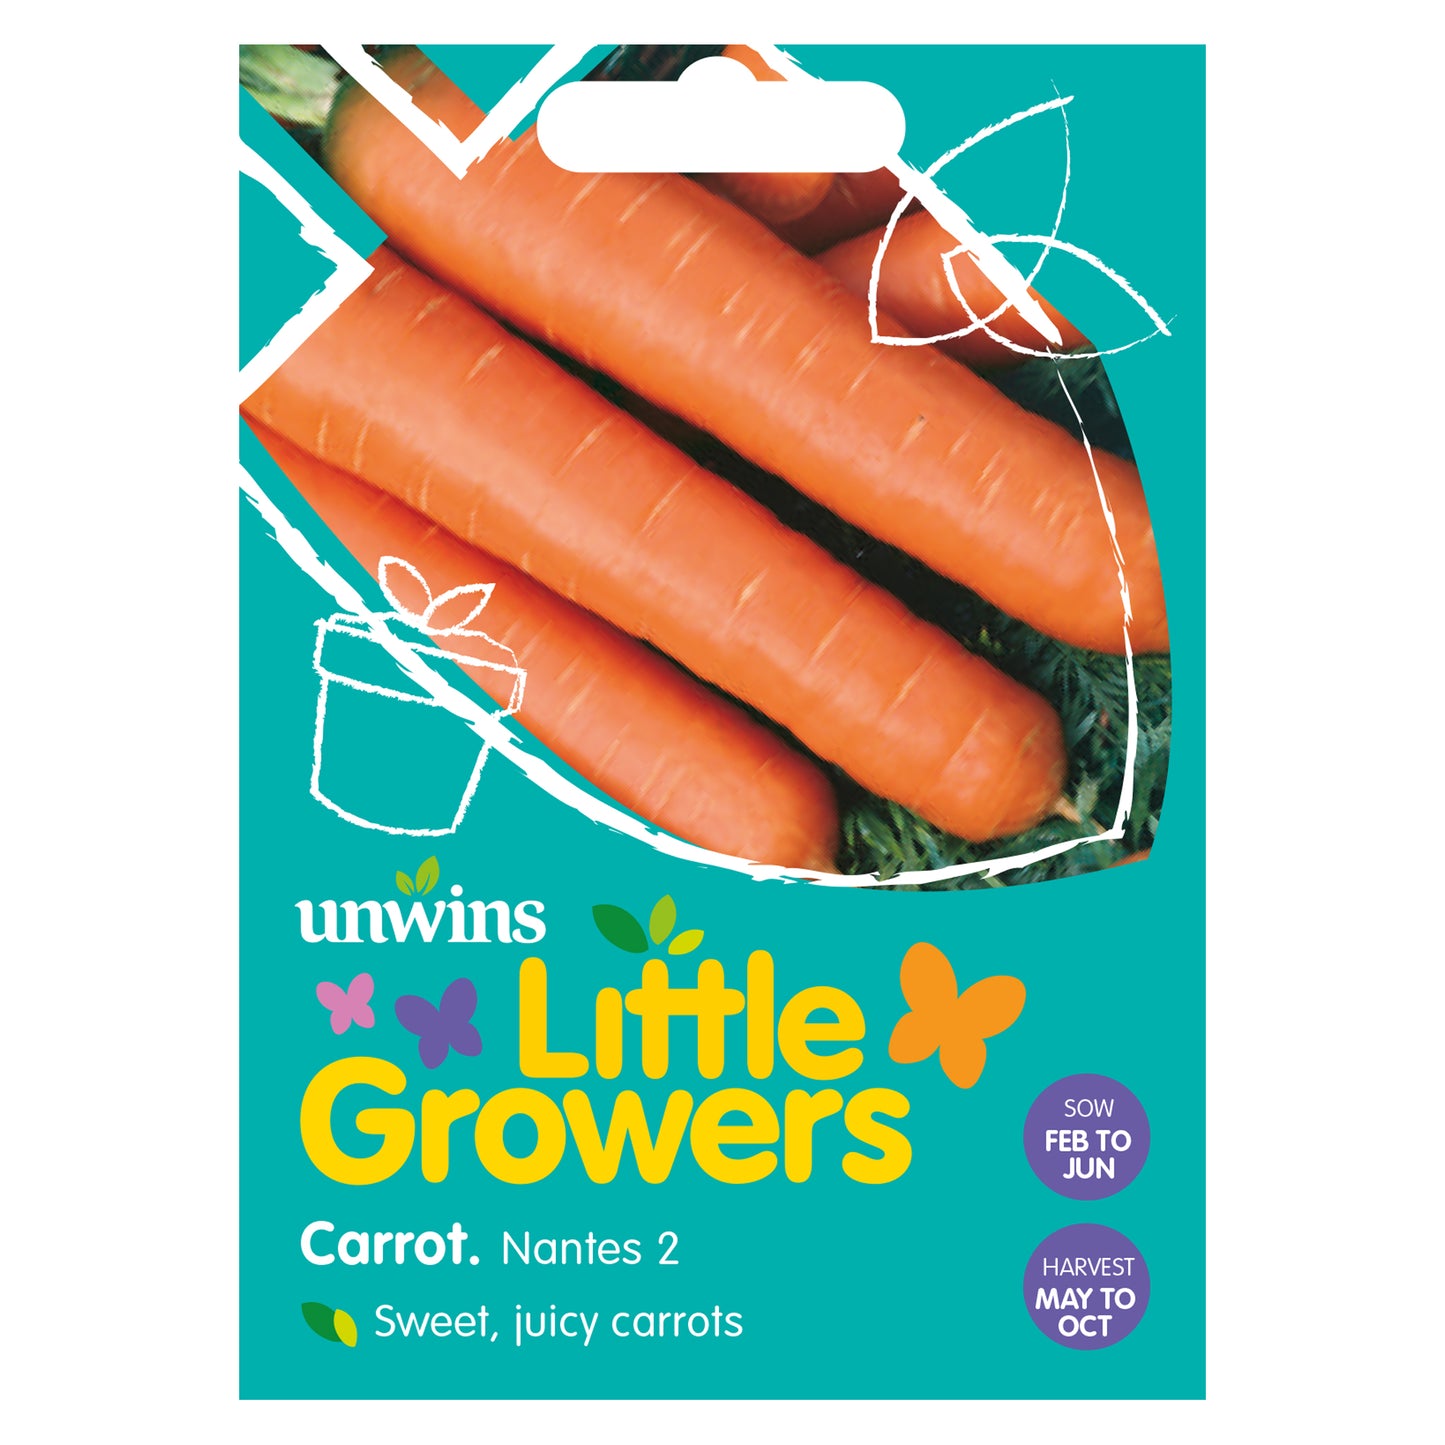 Little Growers Carrot Nantes 2 Seeds front of pack